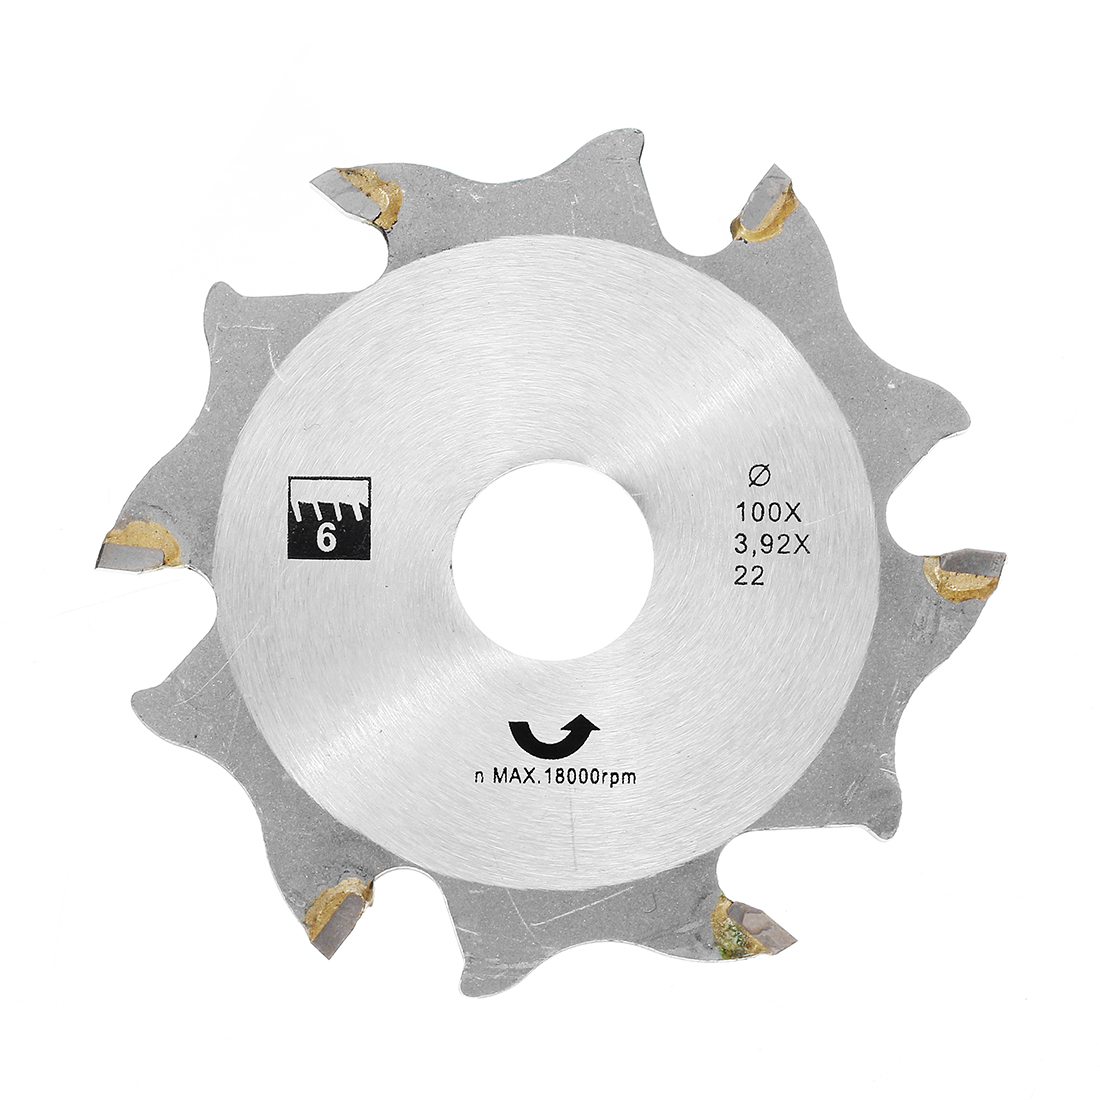 Hilda 100mm Saw Blade for Biscuit Jointer Woodworking Saw Blade